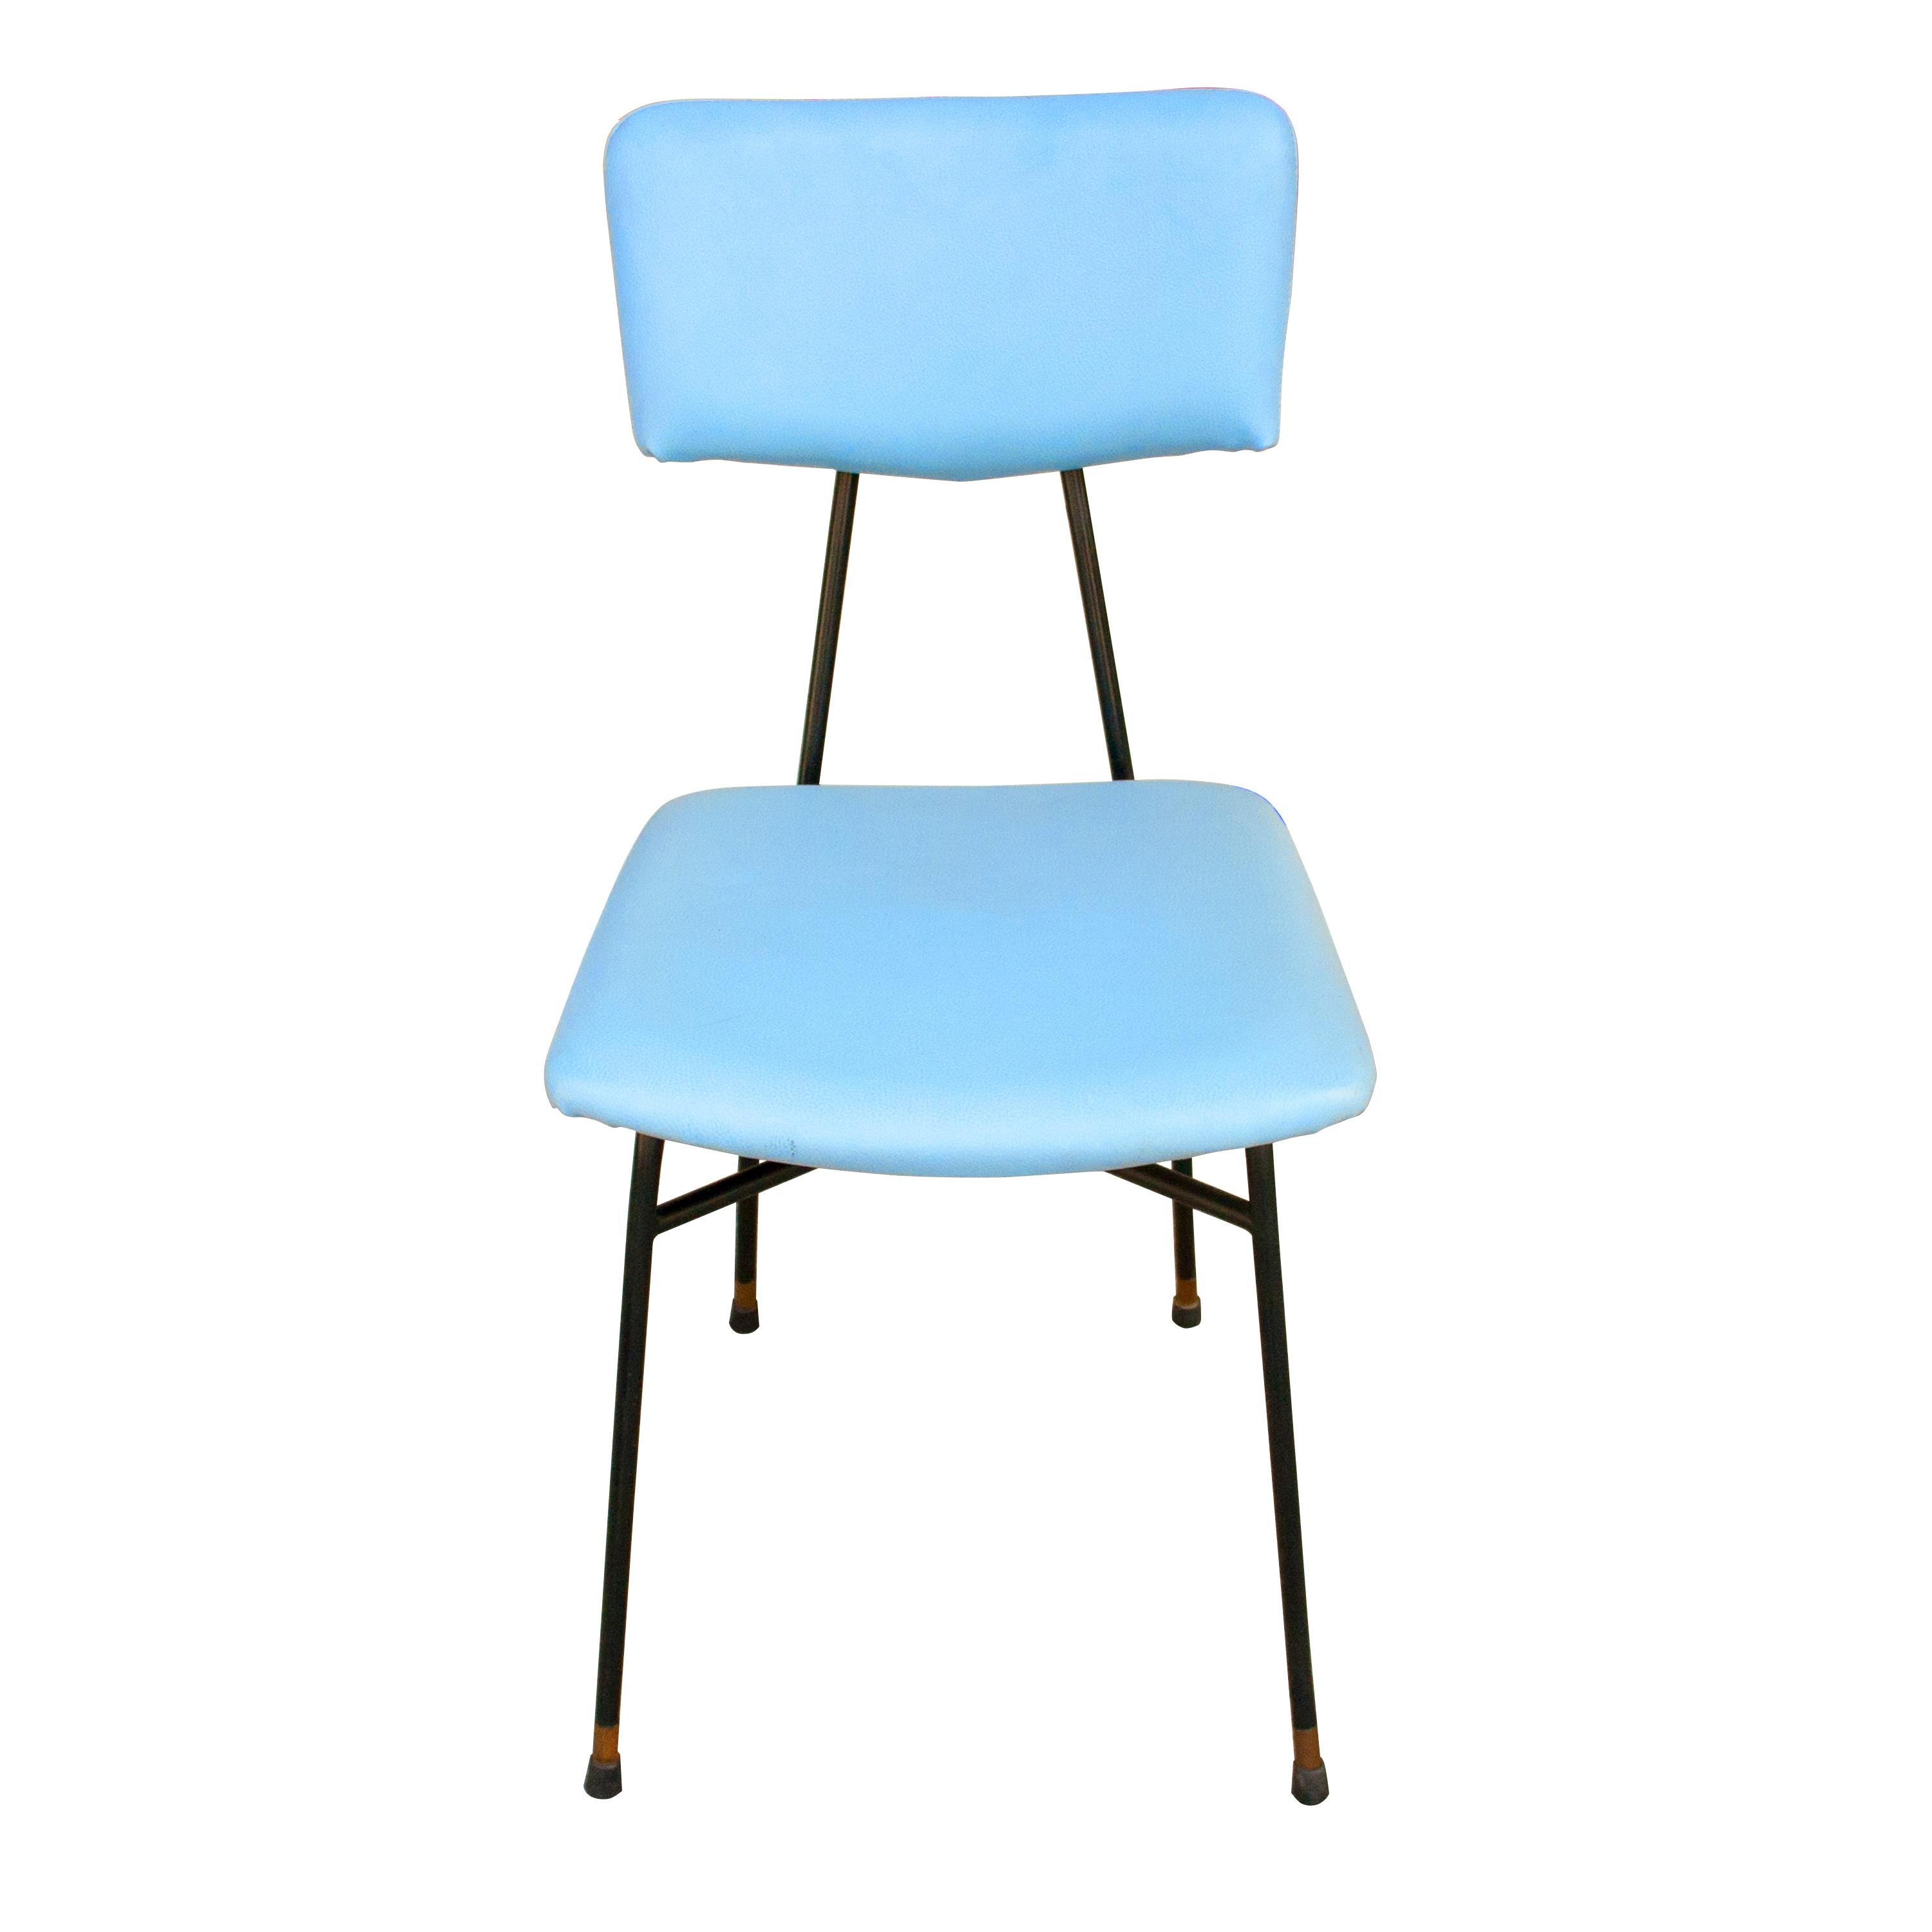 Faux Leather Luigi Scremin 10 Chairs Set Blue Leatherette and Melalic Structure, Italy, 1950 For Sale